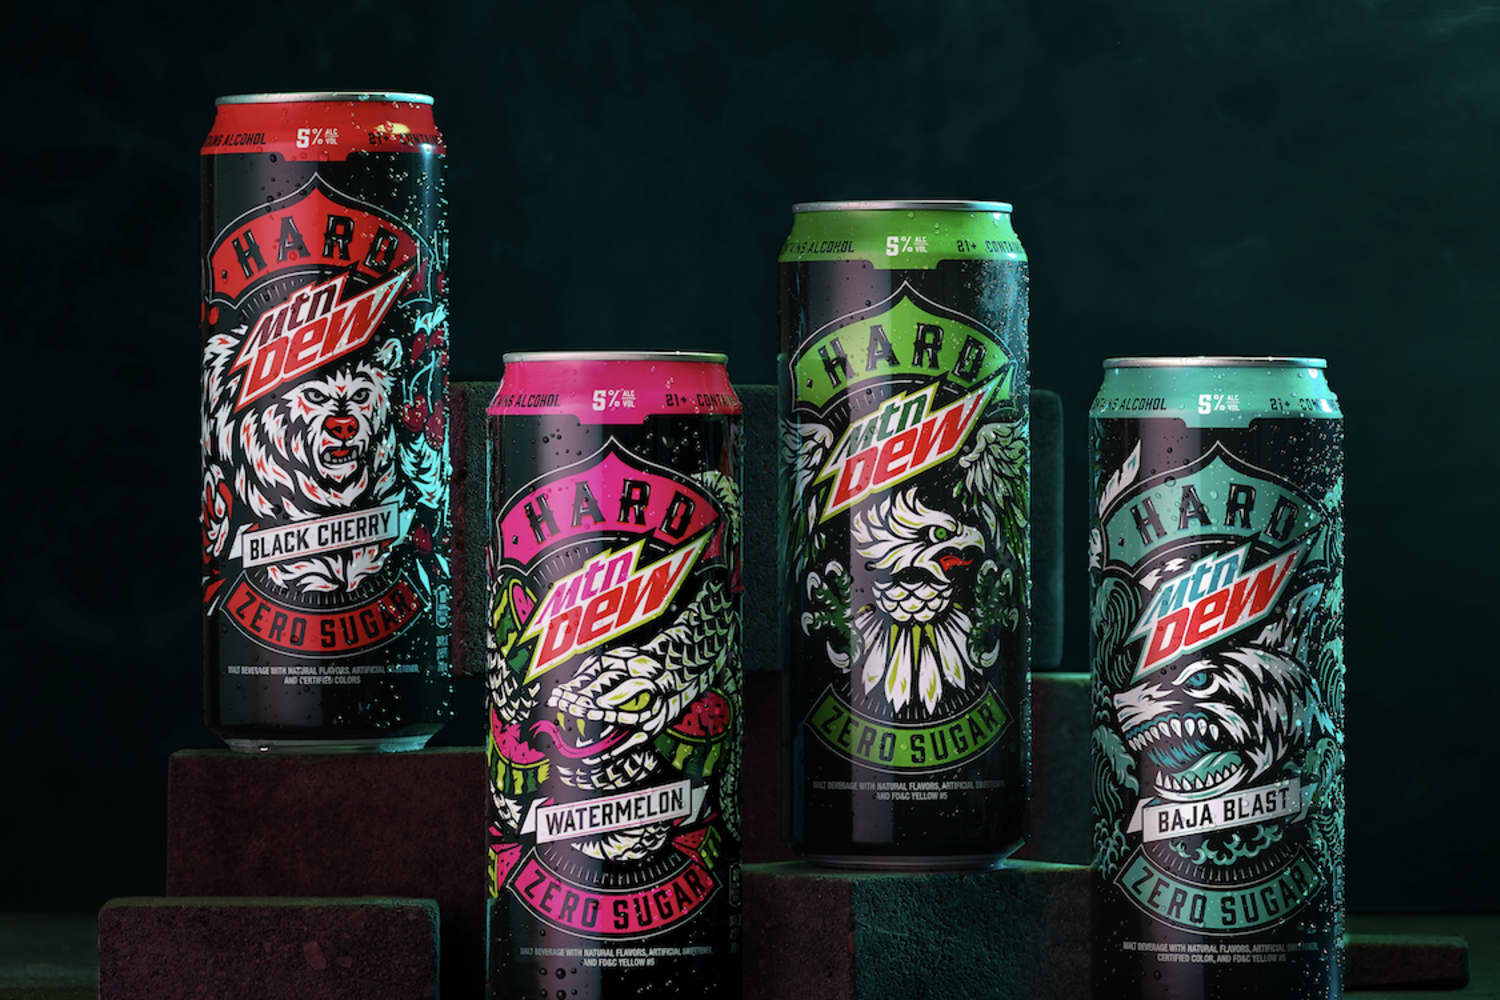 A Boozy Version of MTN DEW Just Hit Shelves | The Kitchn